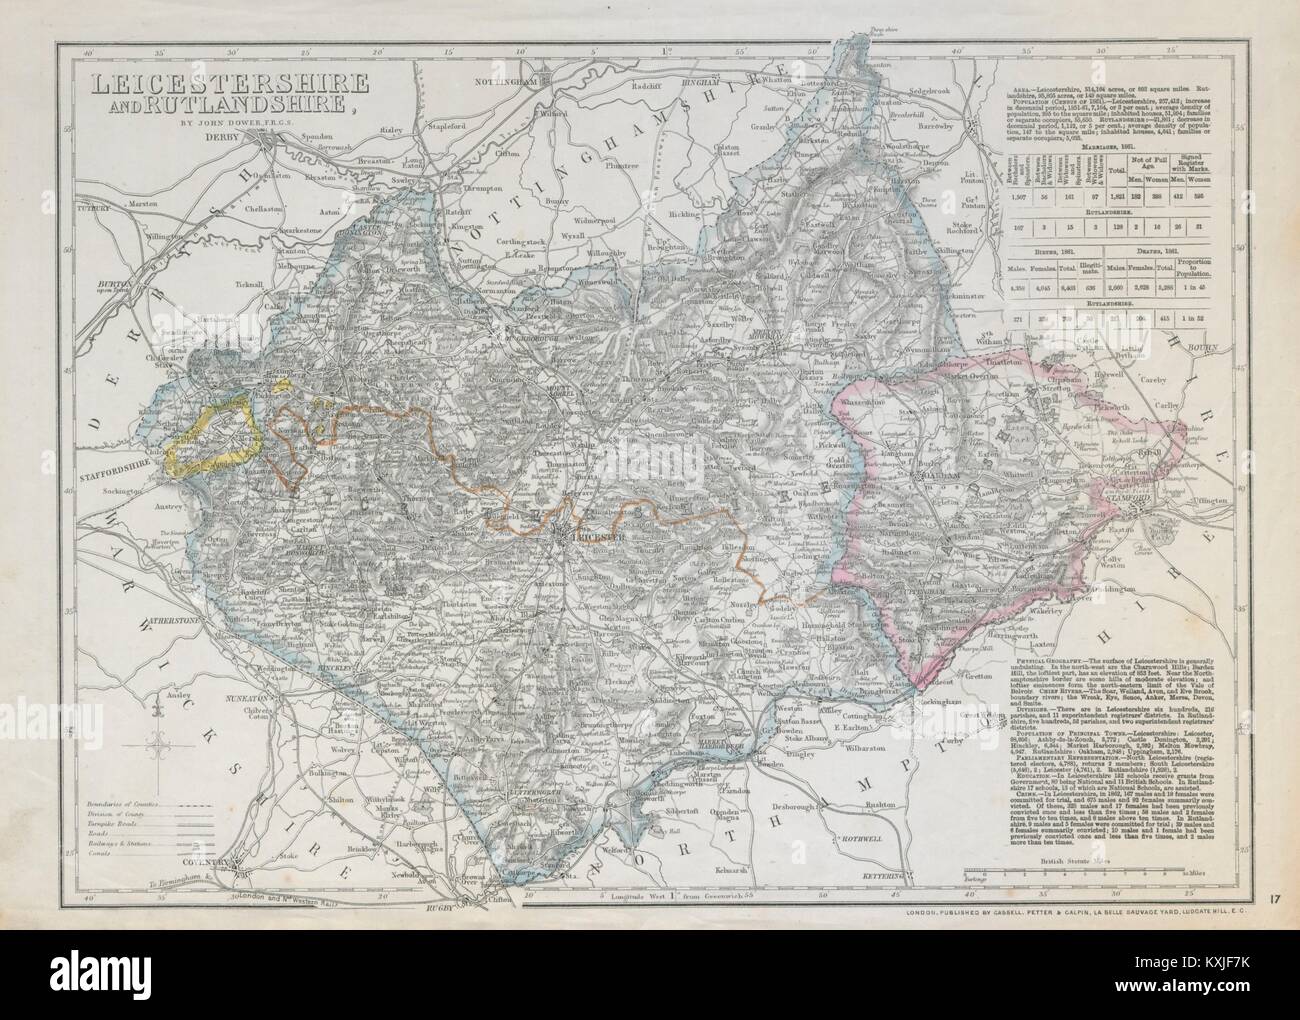 EAST MIDLANDS. Leicestershire & Rutlandshire. Railways Enclaves. DOWER c1863 map Stock Photo